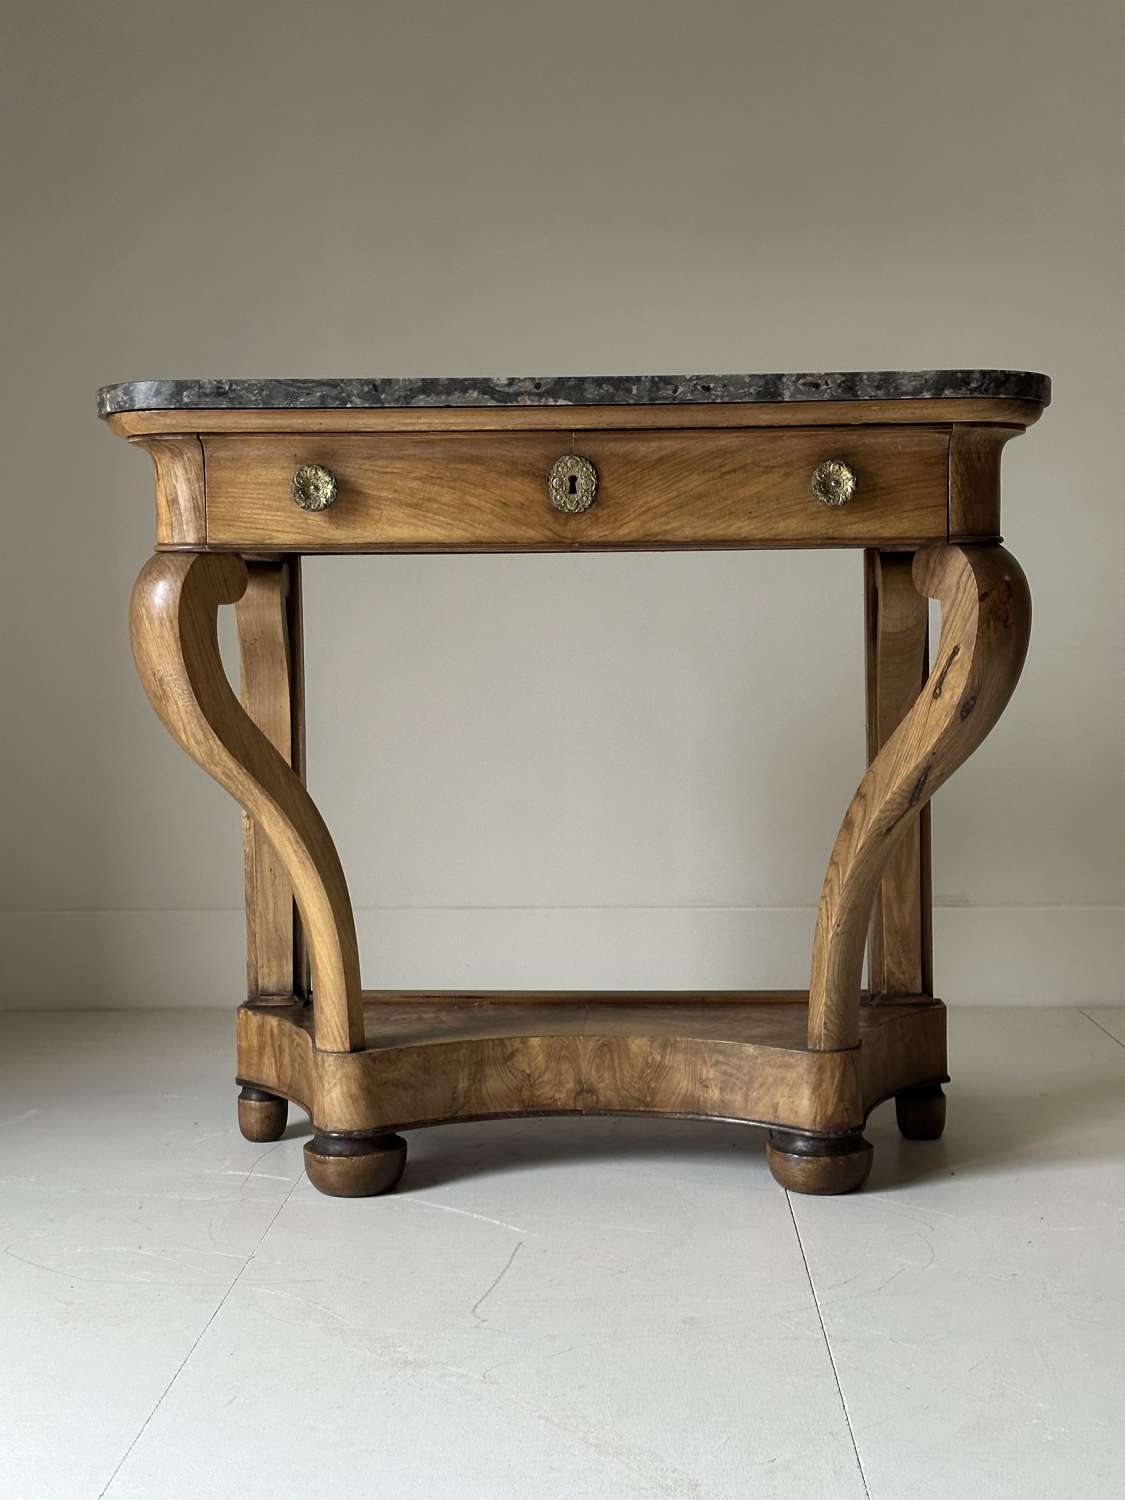 C1830 An Elegant French Walnut Empire Console Table